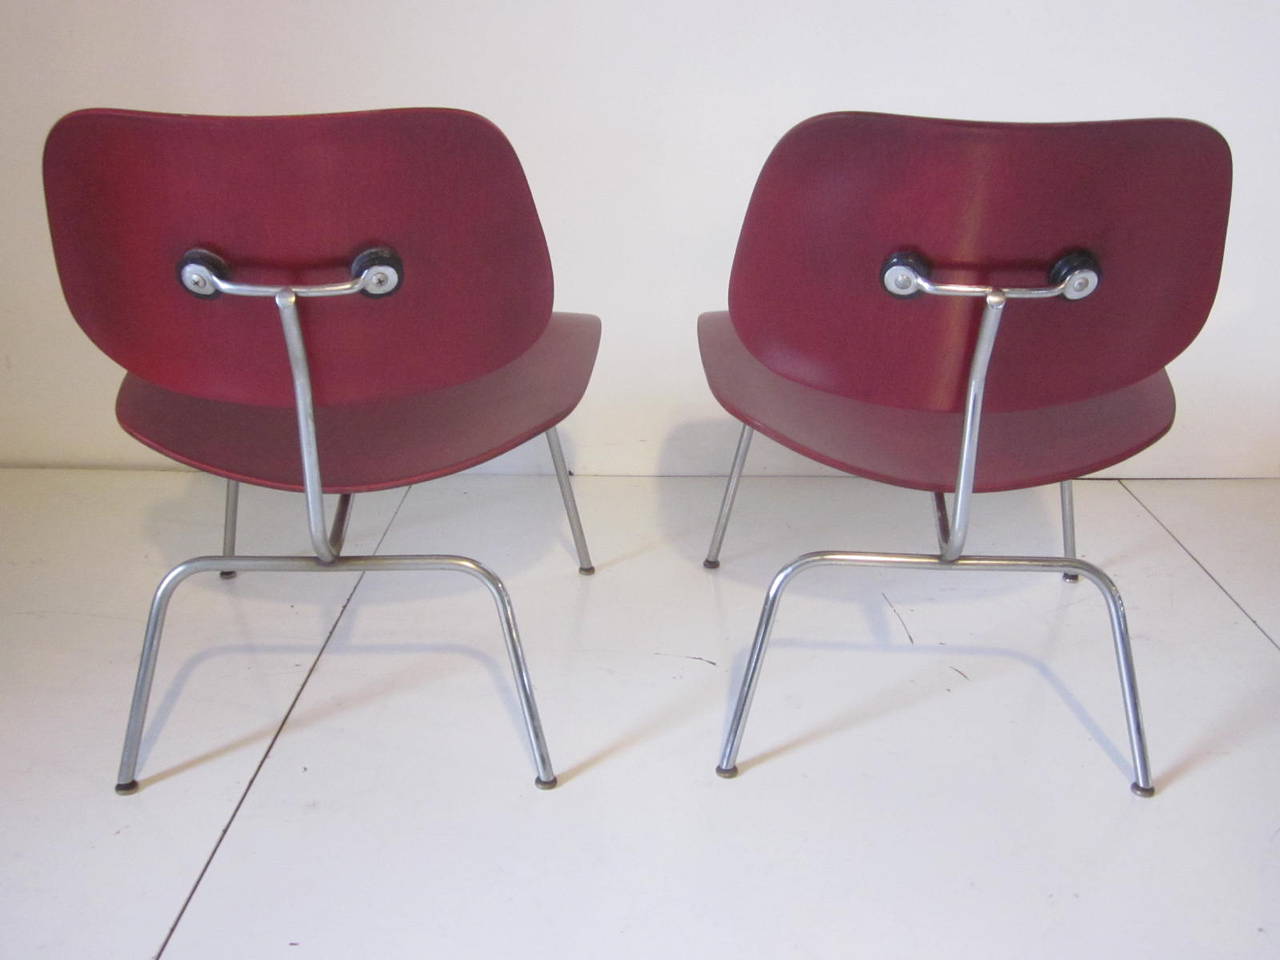 Molded Eames LCM Lounge Chairs